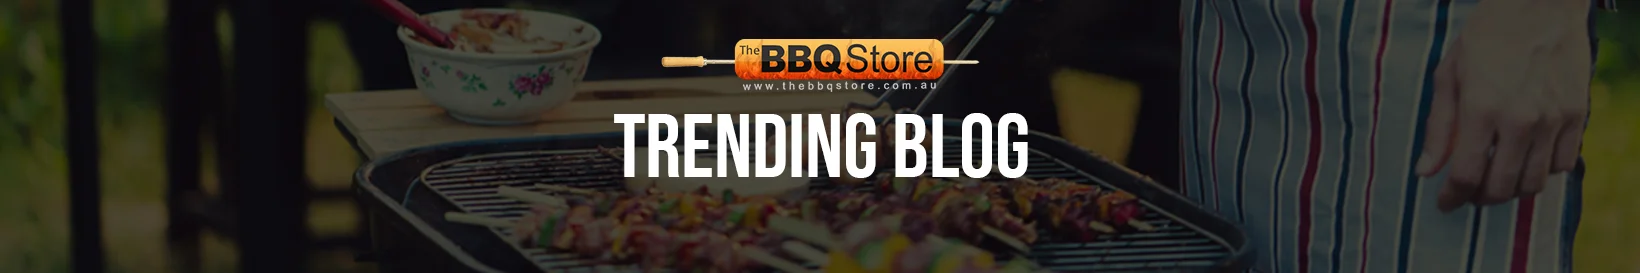 barbeques sale sydney buy bbq online from the bbq store